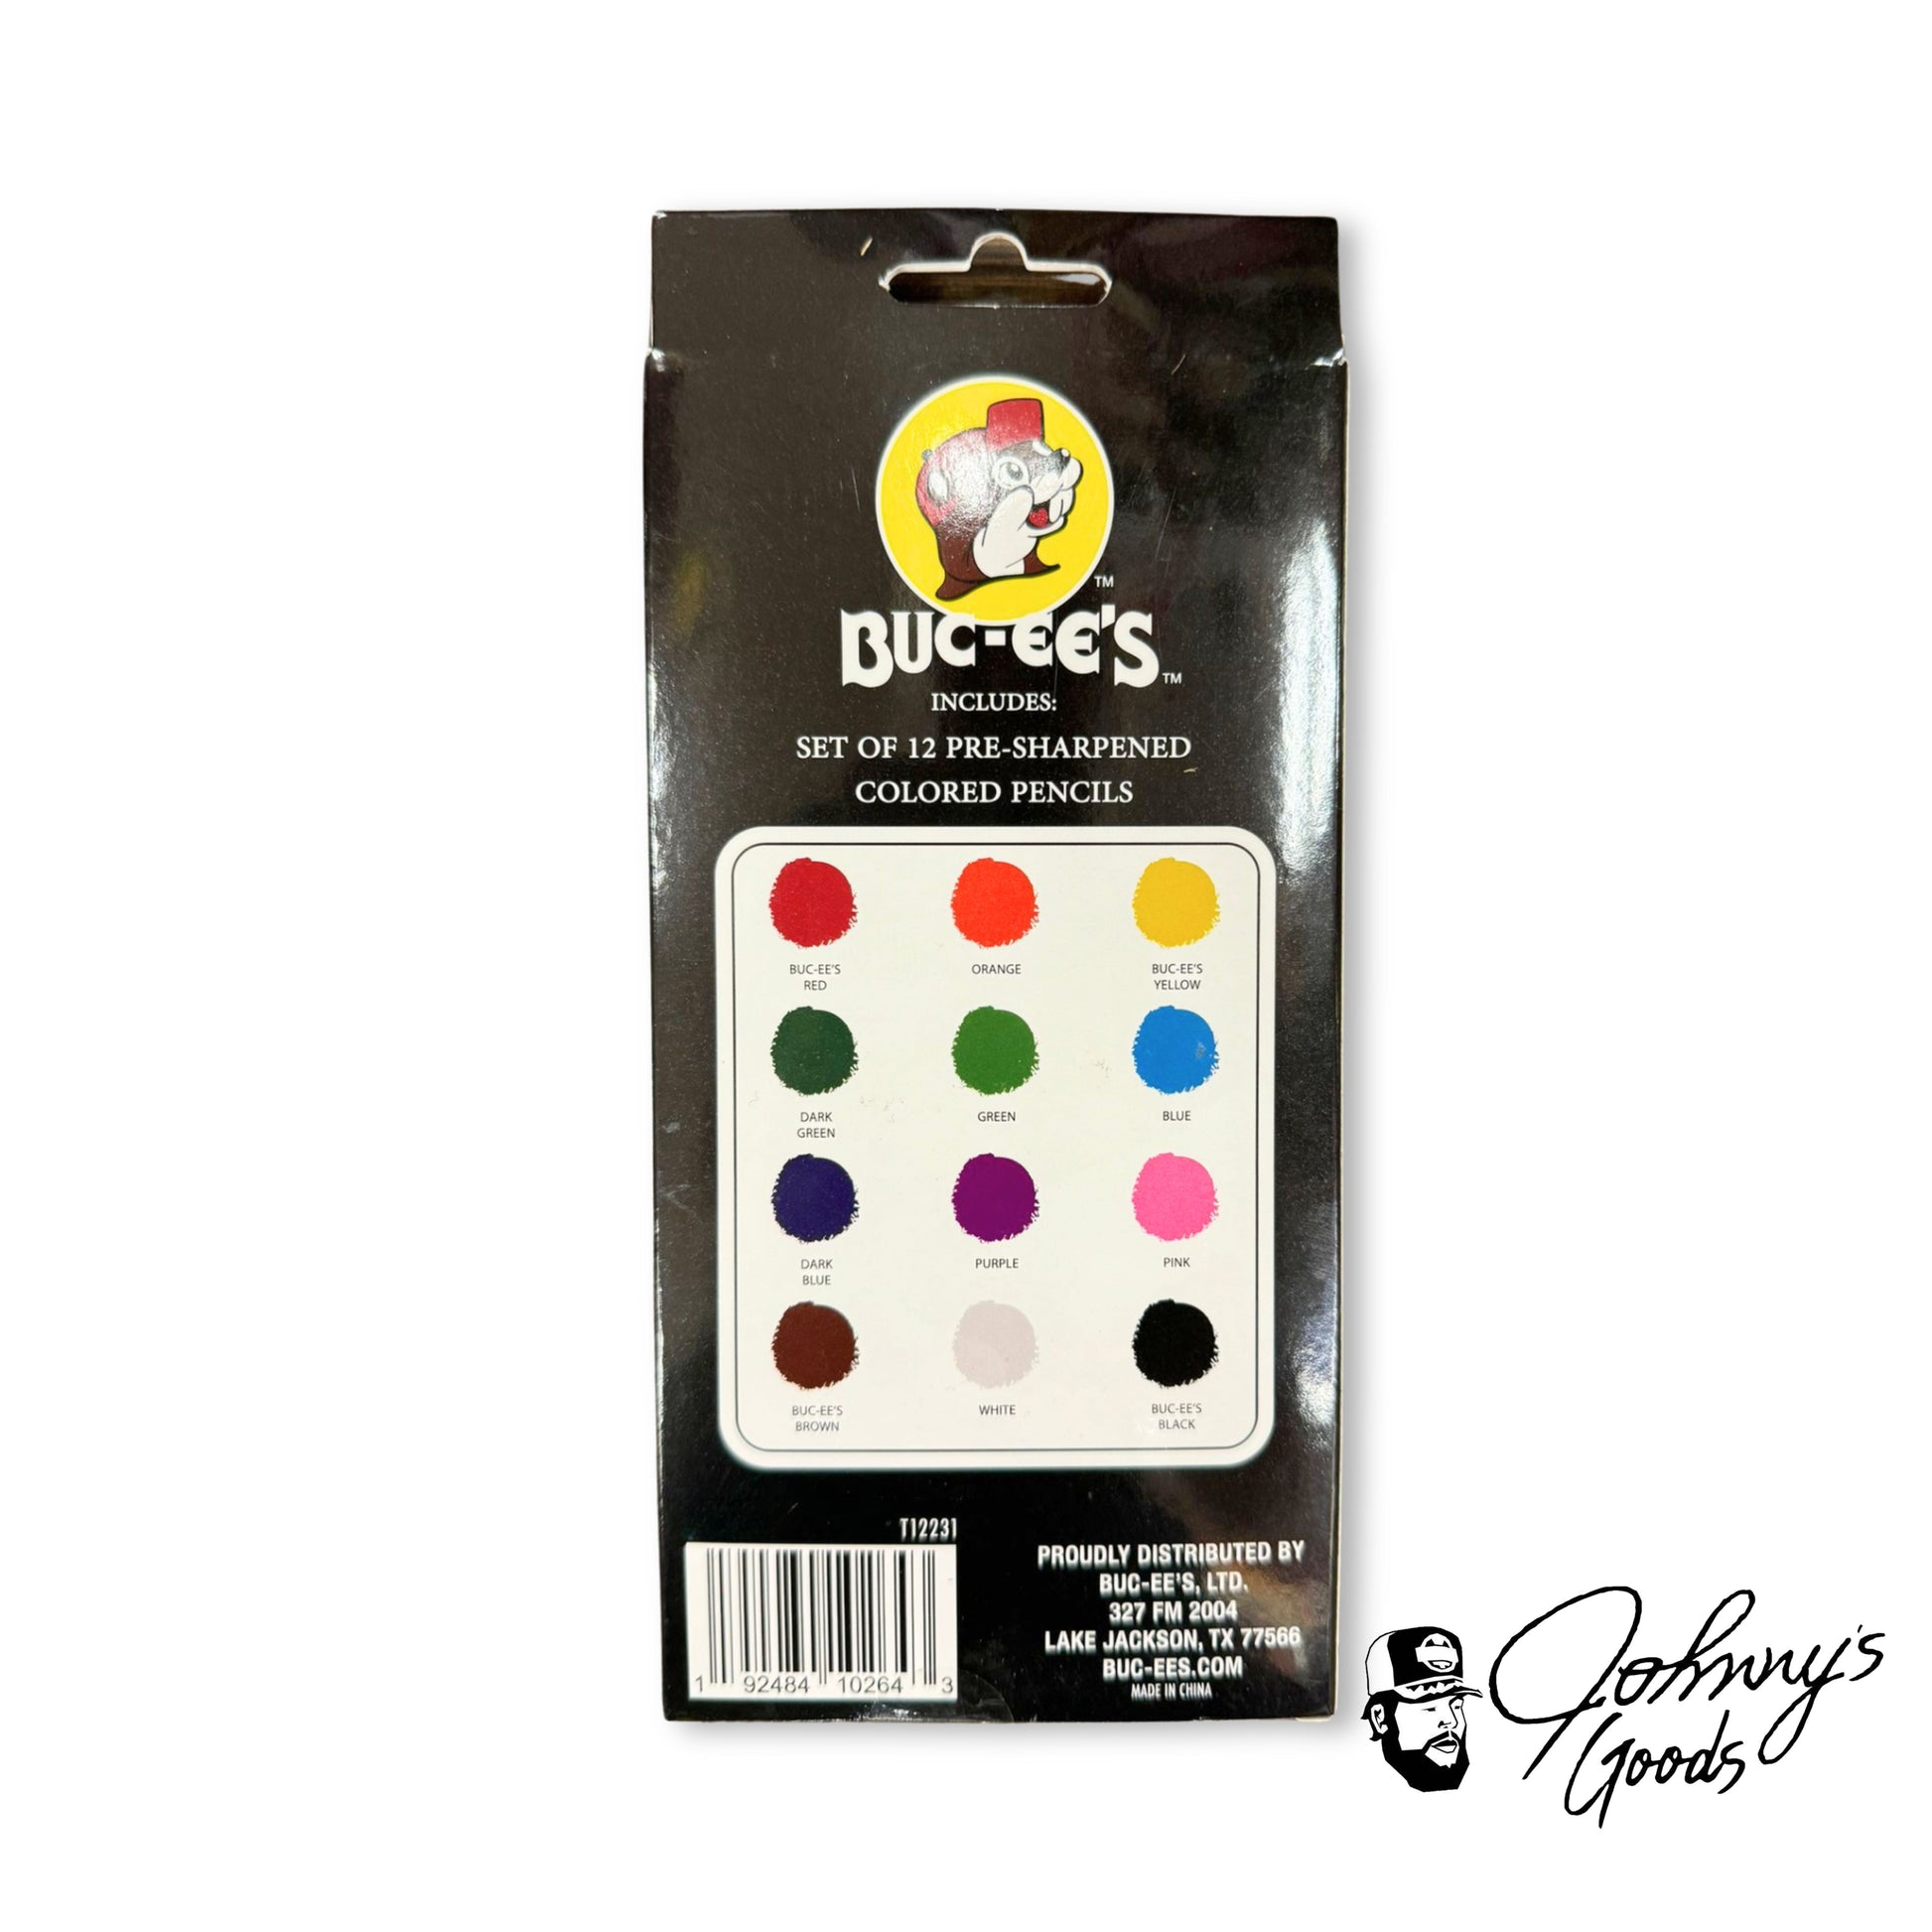 Buc-ee's Colored Pencils, Set of 12 Pre-Sharpened buc ees buc ee's bucees buccees buc-ees